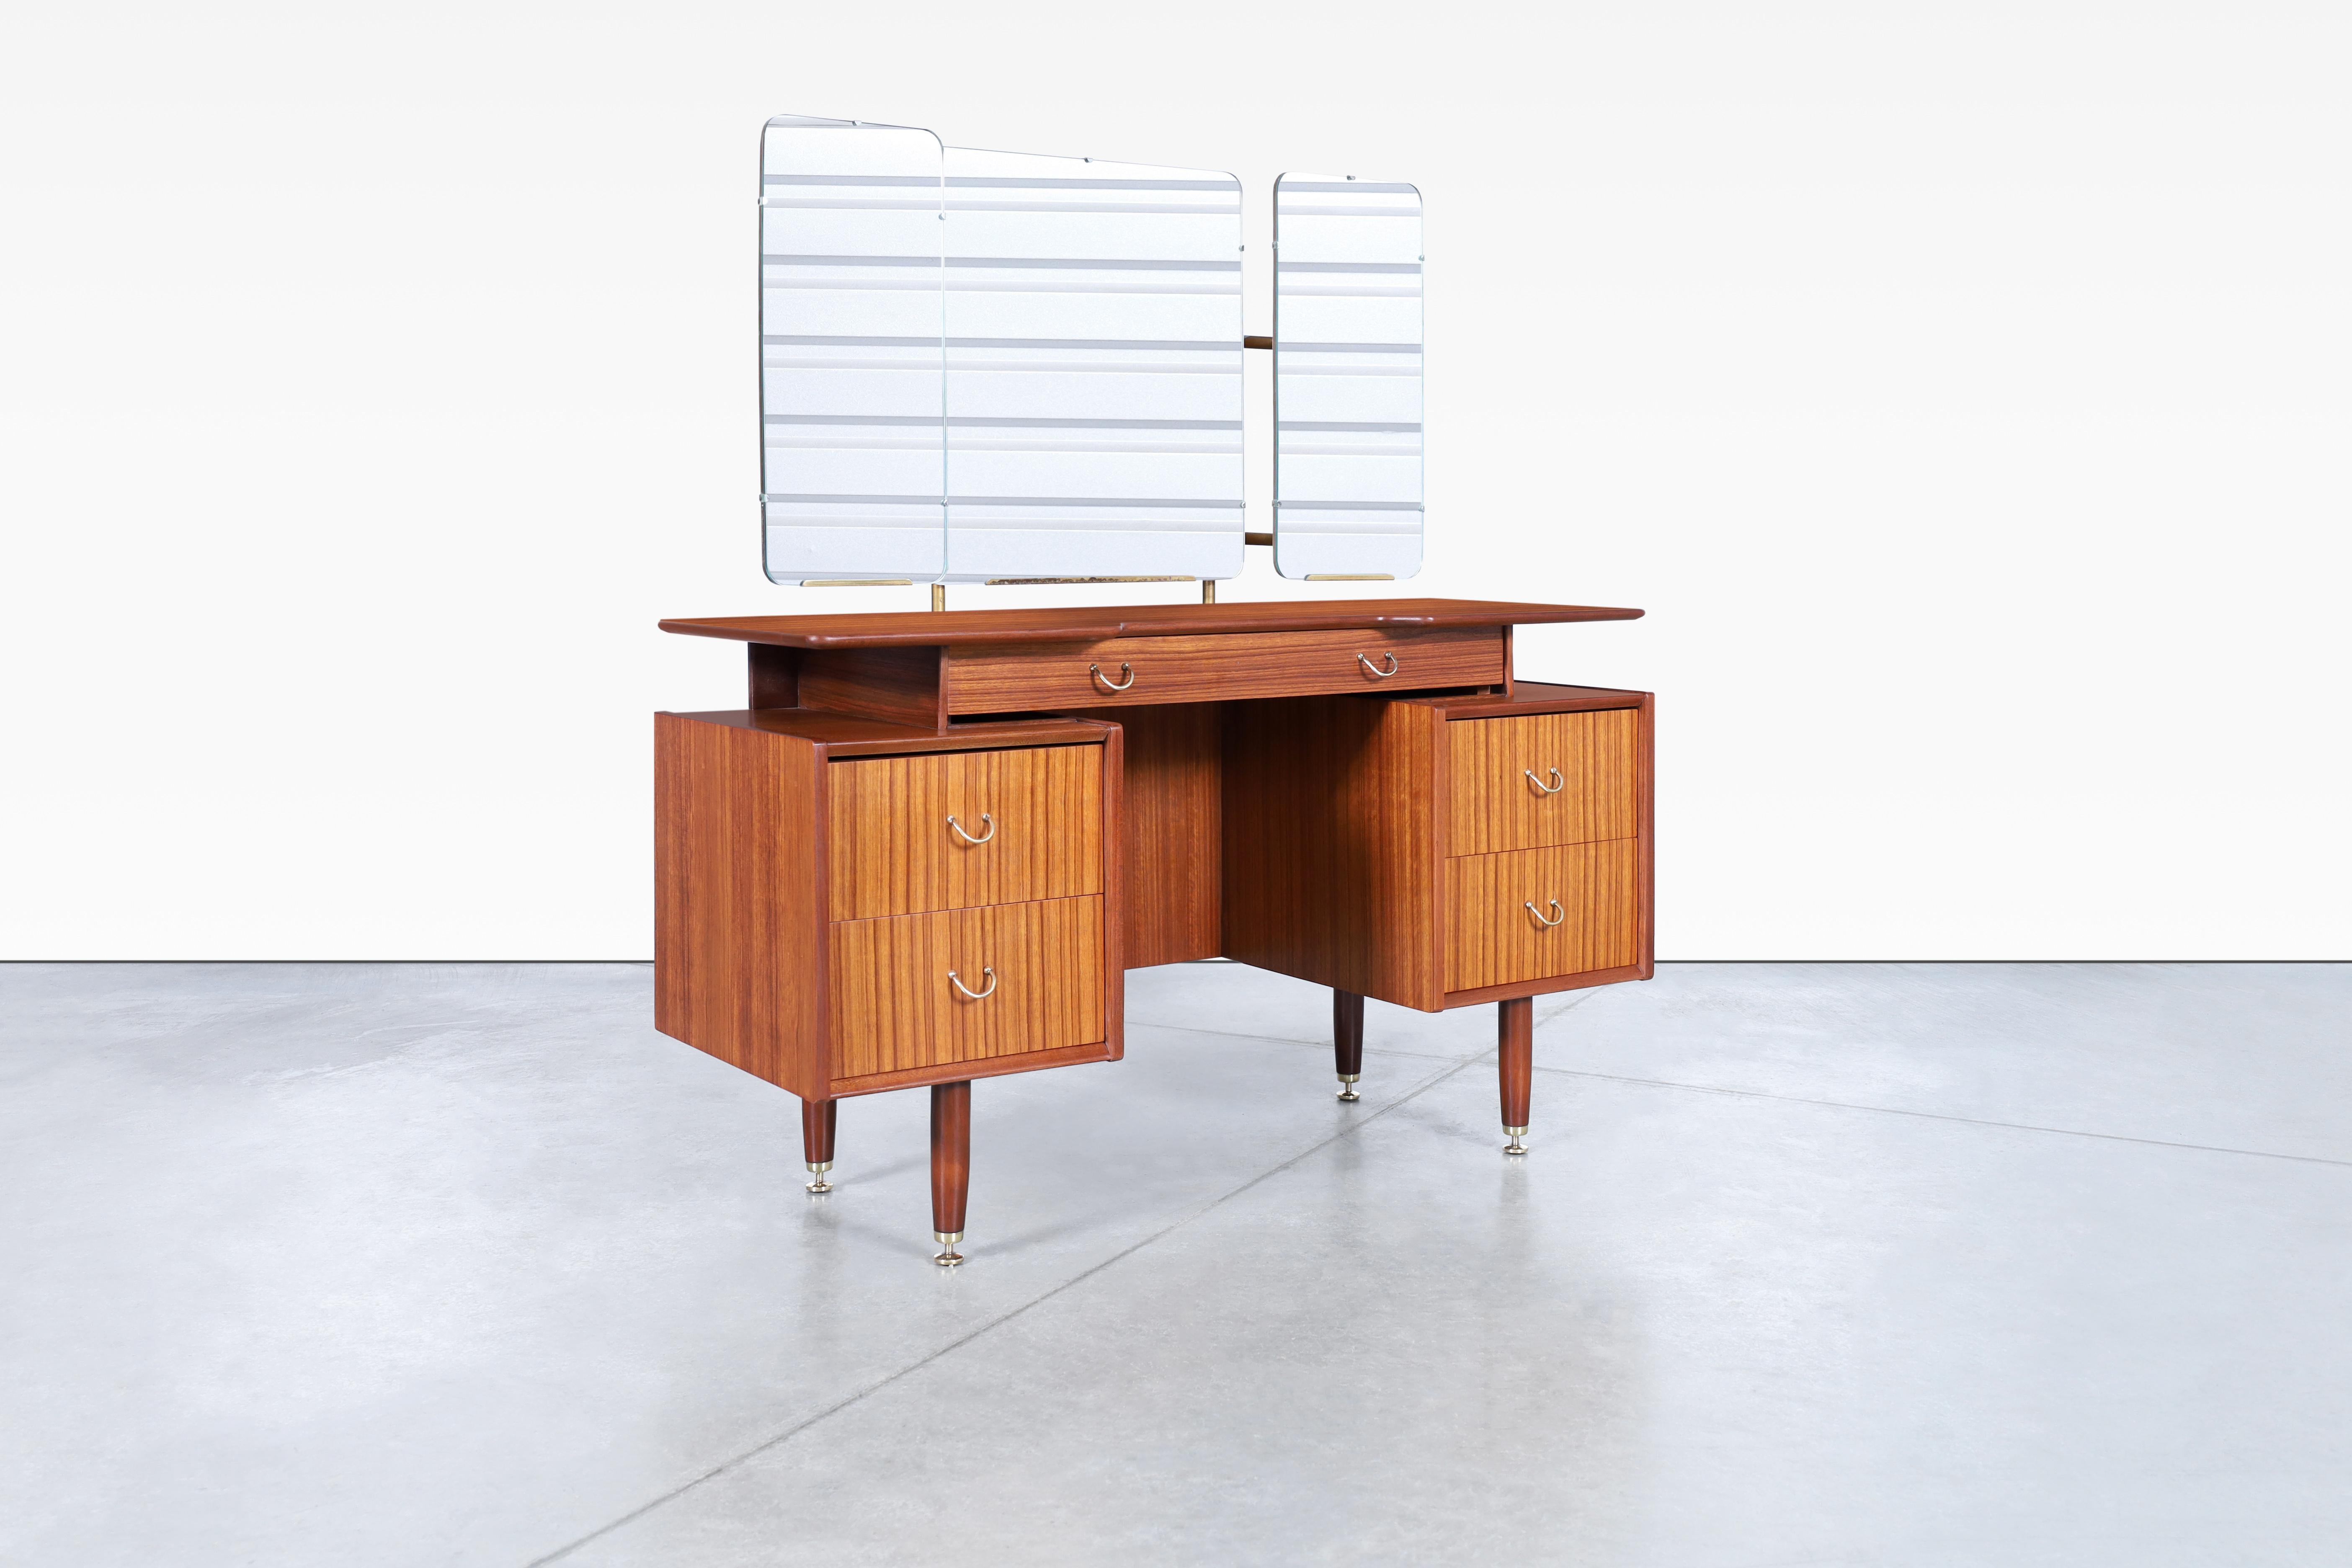 Mid-century modern vanity/desk designed by E. Gomme for G-Plan in United Kingdom, circa 1950s. This exquisite vanity is a true masterpiece and features four intricately crafted drawers and a central drawer with dividers that create separate storage